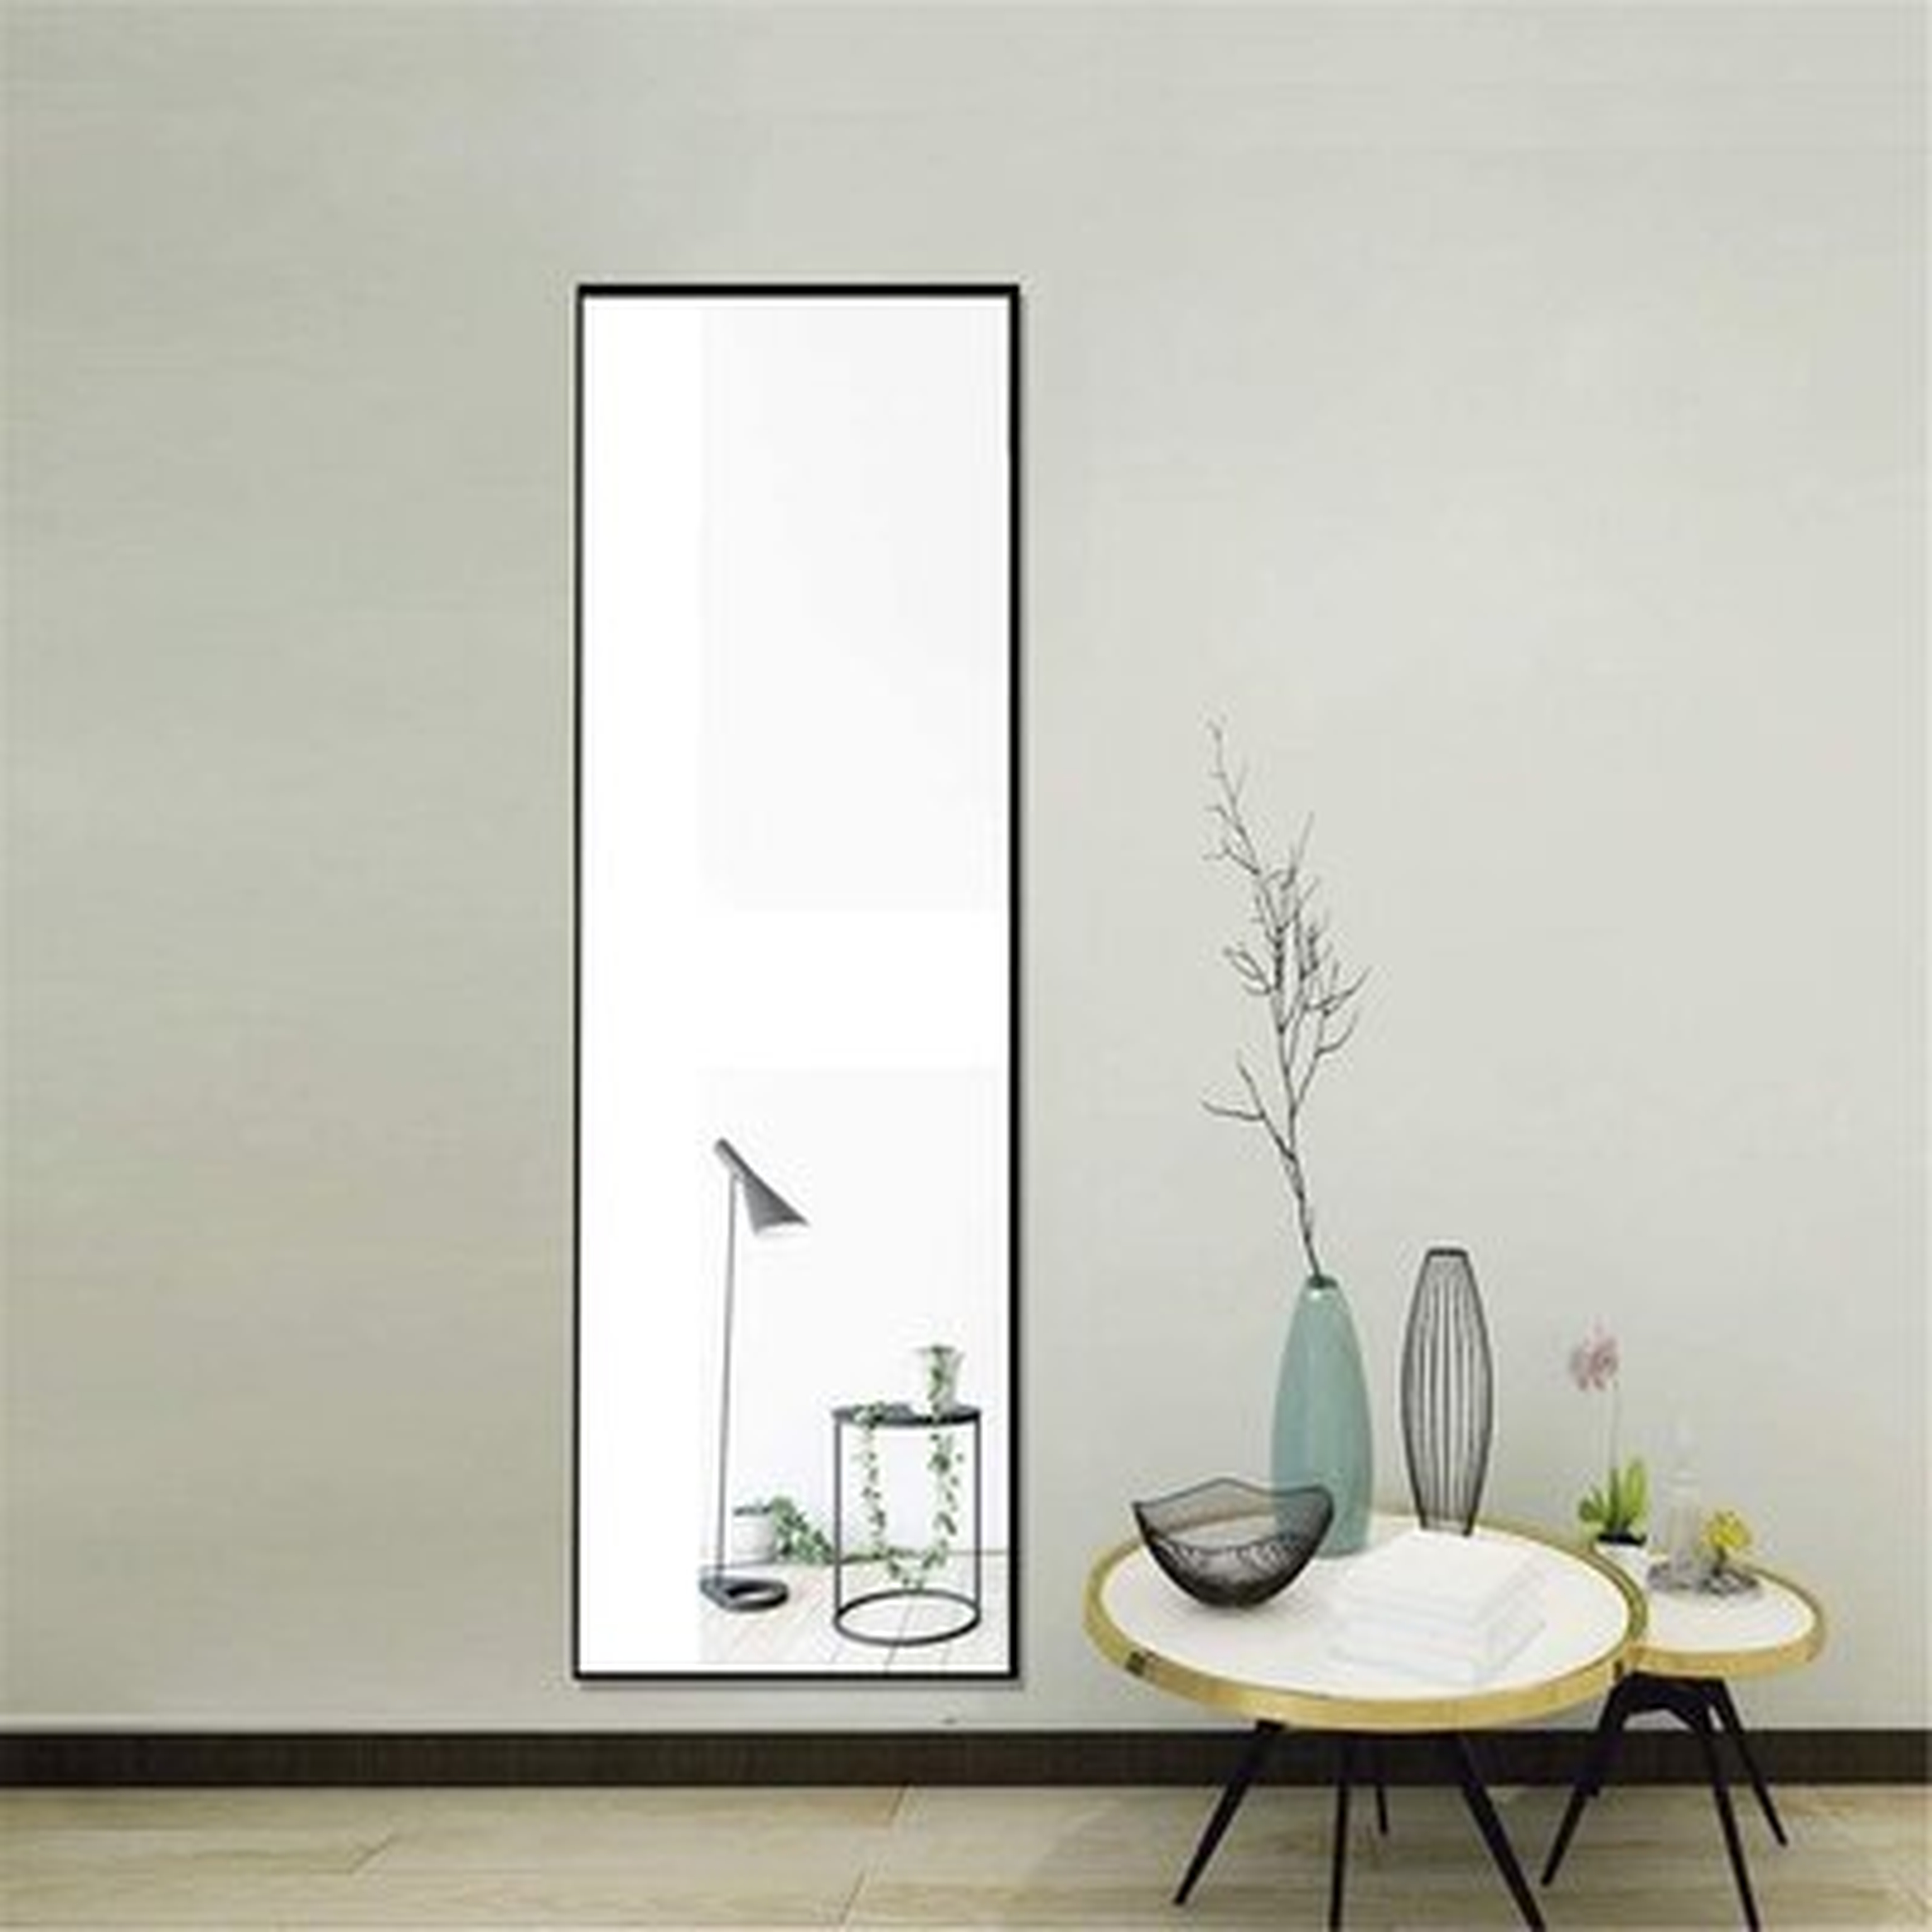 Miro 1500 400-G Full Length Mirror Floor Mirror Hanging Standing Or Leaning, Bedroom Mirror Wall-Mounted Mirror With Gold Aluminum Alloy Frame, 59" X 15.7" - Wayfair